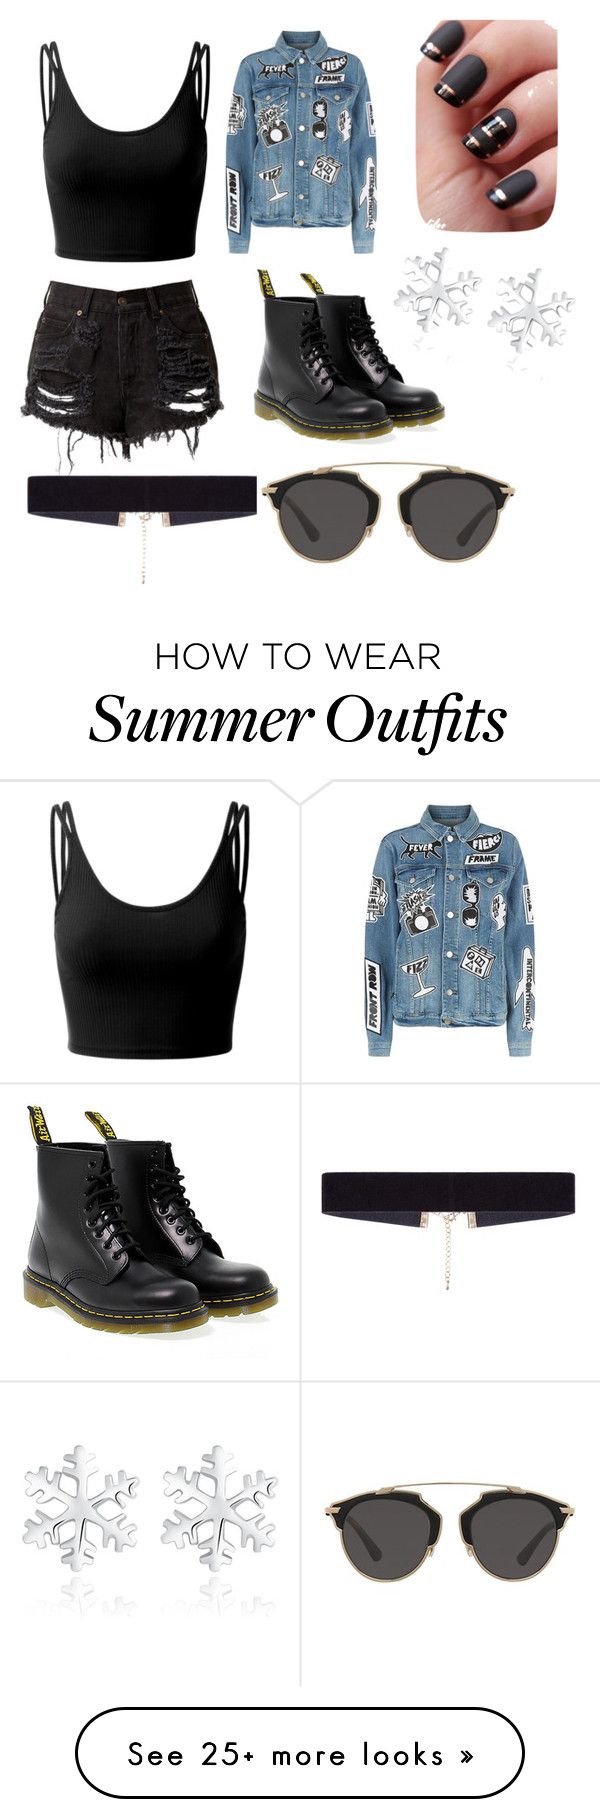 "summer outfit" by chamsdaghsni on Polyvore featuring Doublju, Frame, ...